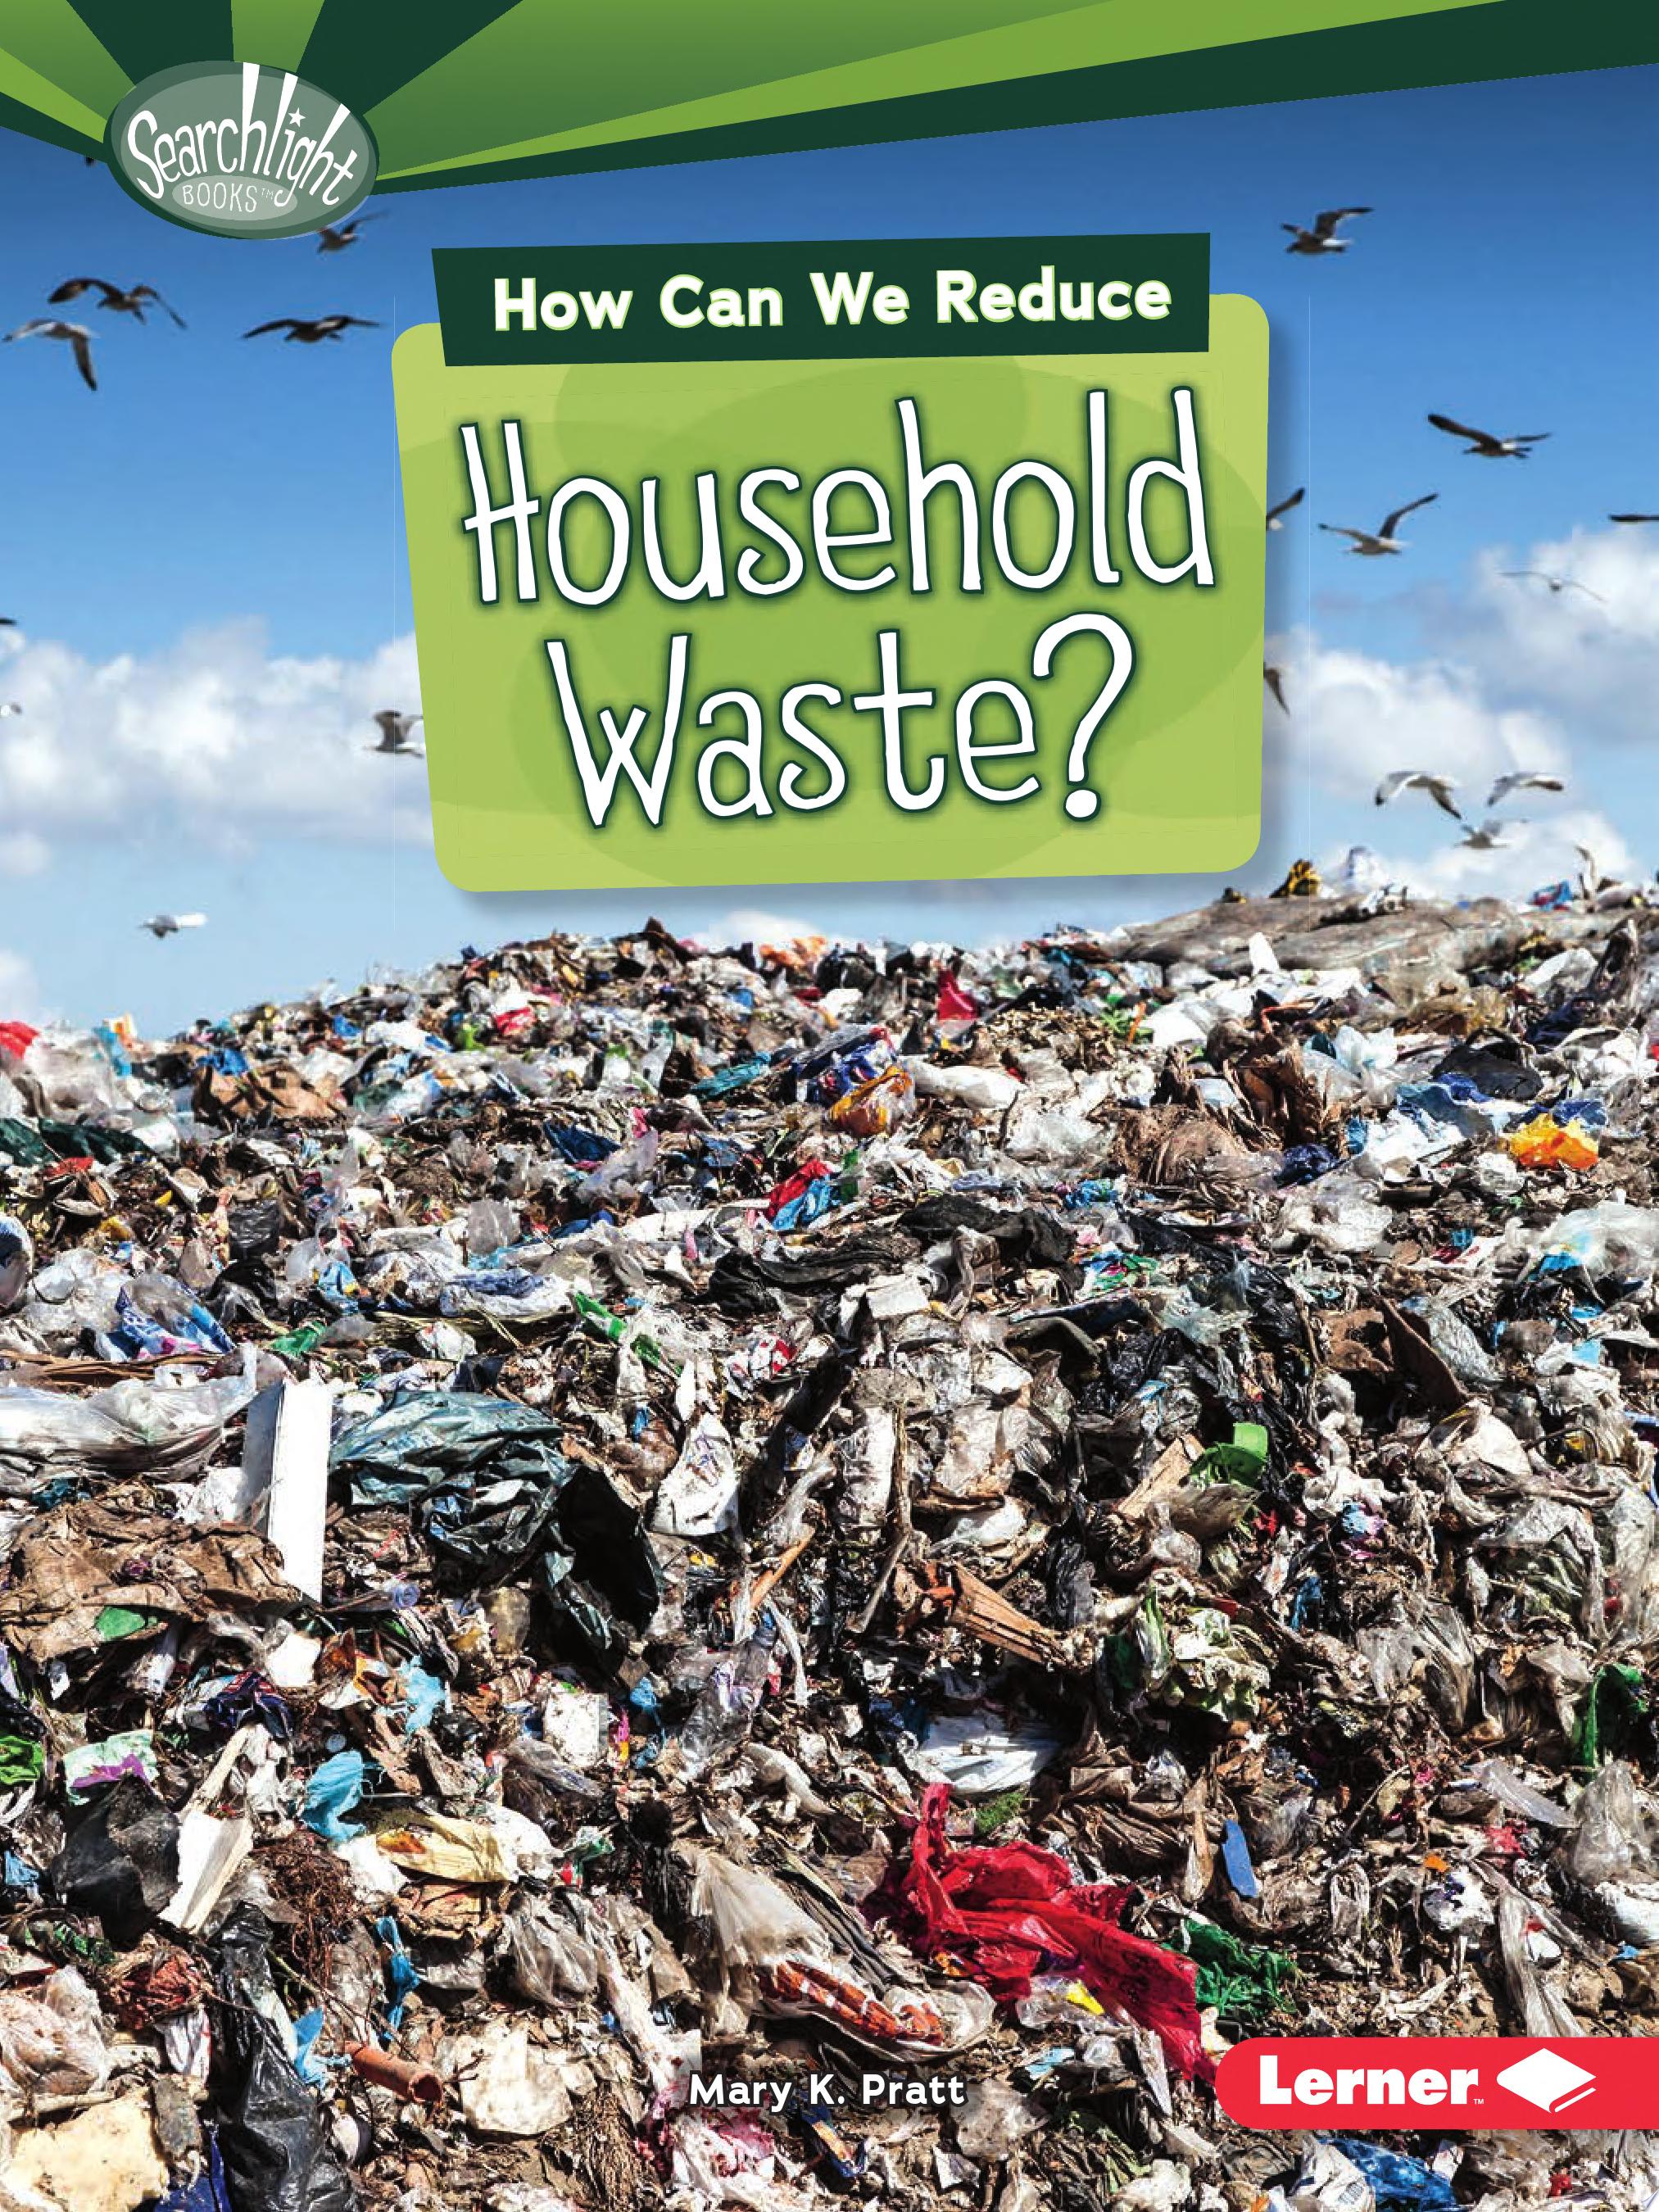 Image for "How Can We Reduce Household Waste?"